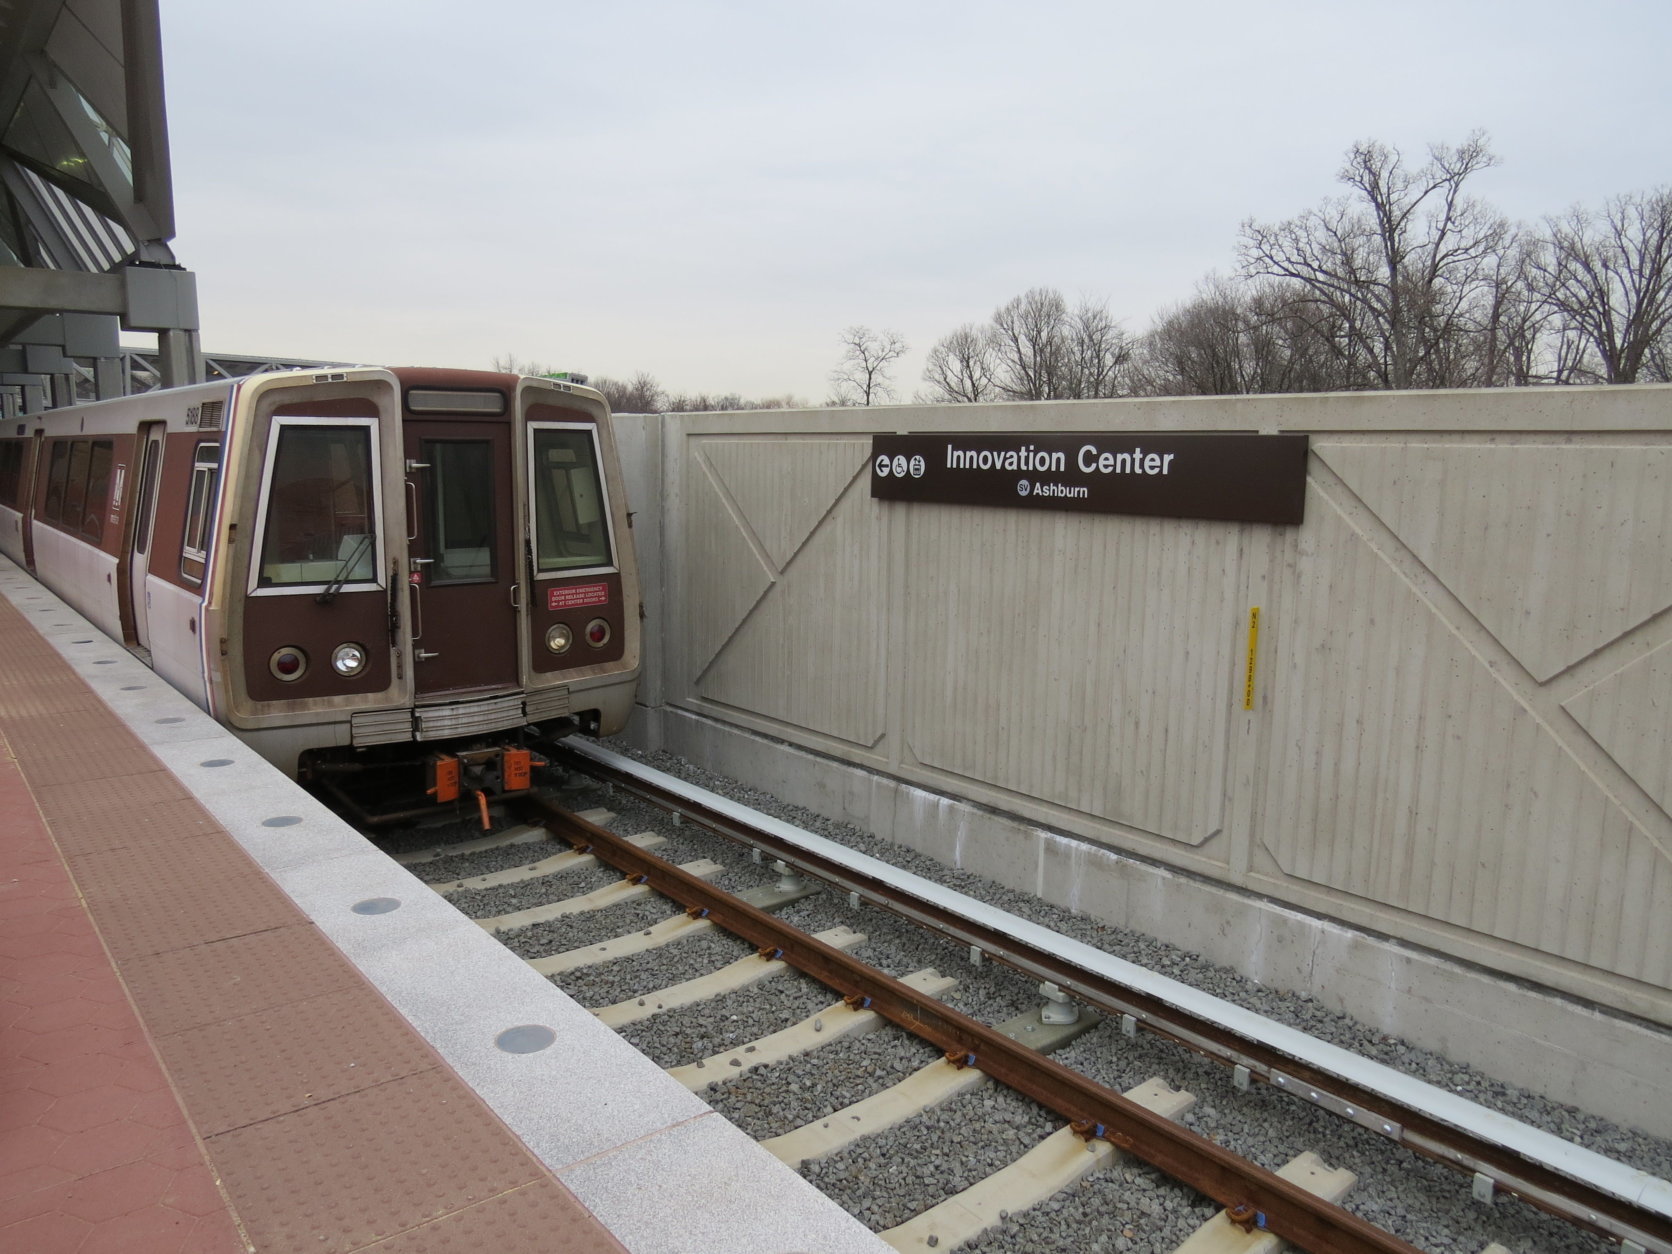 <h2><strong>New Silver Line stations</strong></h2>
<p>Progress is being made on the Silver Line extension to Dulles International Airport and Loudoun County, Virginia, but the actual opening time <a href="https://wtop.com/dc-transit/2019/12/new-developments-on-the-silver-line-timeline-what-to-know/" target="_blank" rel="noopener">remains up in the air</a>.</p>
<p>Work to link the extension to the first phase of the Silver Line has been put on hold over concerns that the changes might disrupt current Metro operations.</p>
<p>Metro&#8217;s current schedule forecast calls for substantial completion of the stations and main tracks in June 2020 while a contractor schedule projects it will have testing required for substantial completion done by August 2020.</p>
